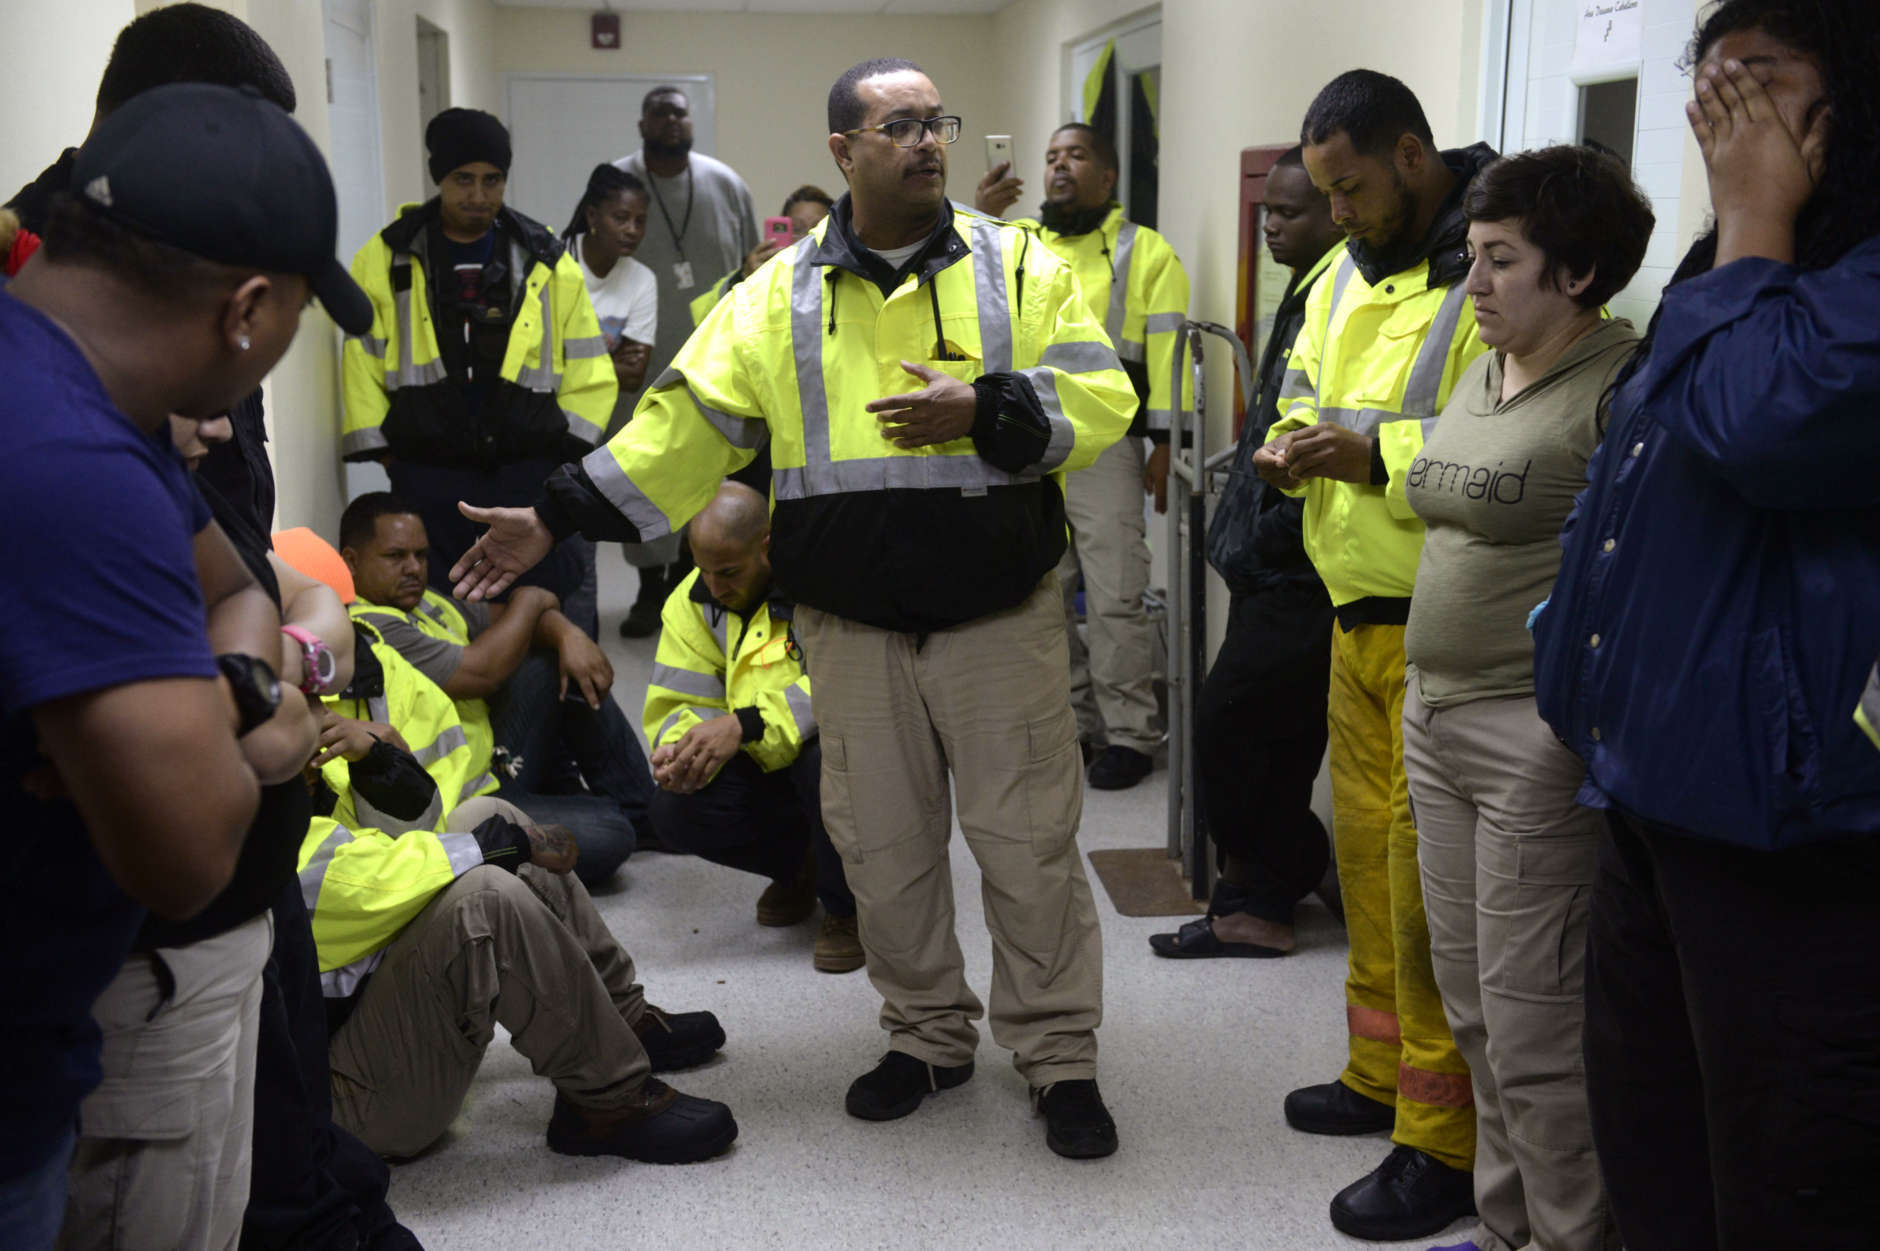 Team leader Joey Rivera gives a speech while feelings of frustration surround the members of the rescue team from the municipality of Humacao, desperate to go out to attend several calls for help from citizens in need of assistance during the impact of Maria, a Category 5 hurricane that started to hit the eastern region of the island, in Humacao, Puerto Rico, Tuesday, Sept. 20, 2017.  Puerto Rico faced Wednesday what officials said could be the strongest hurricane to ever hit the U.S. territory as they warned it would decimate the power company's crumbling infrastructure and force the government to rebuild dozens of communities.(AP Photo/Carlos Giusti)